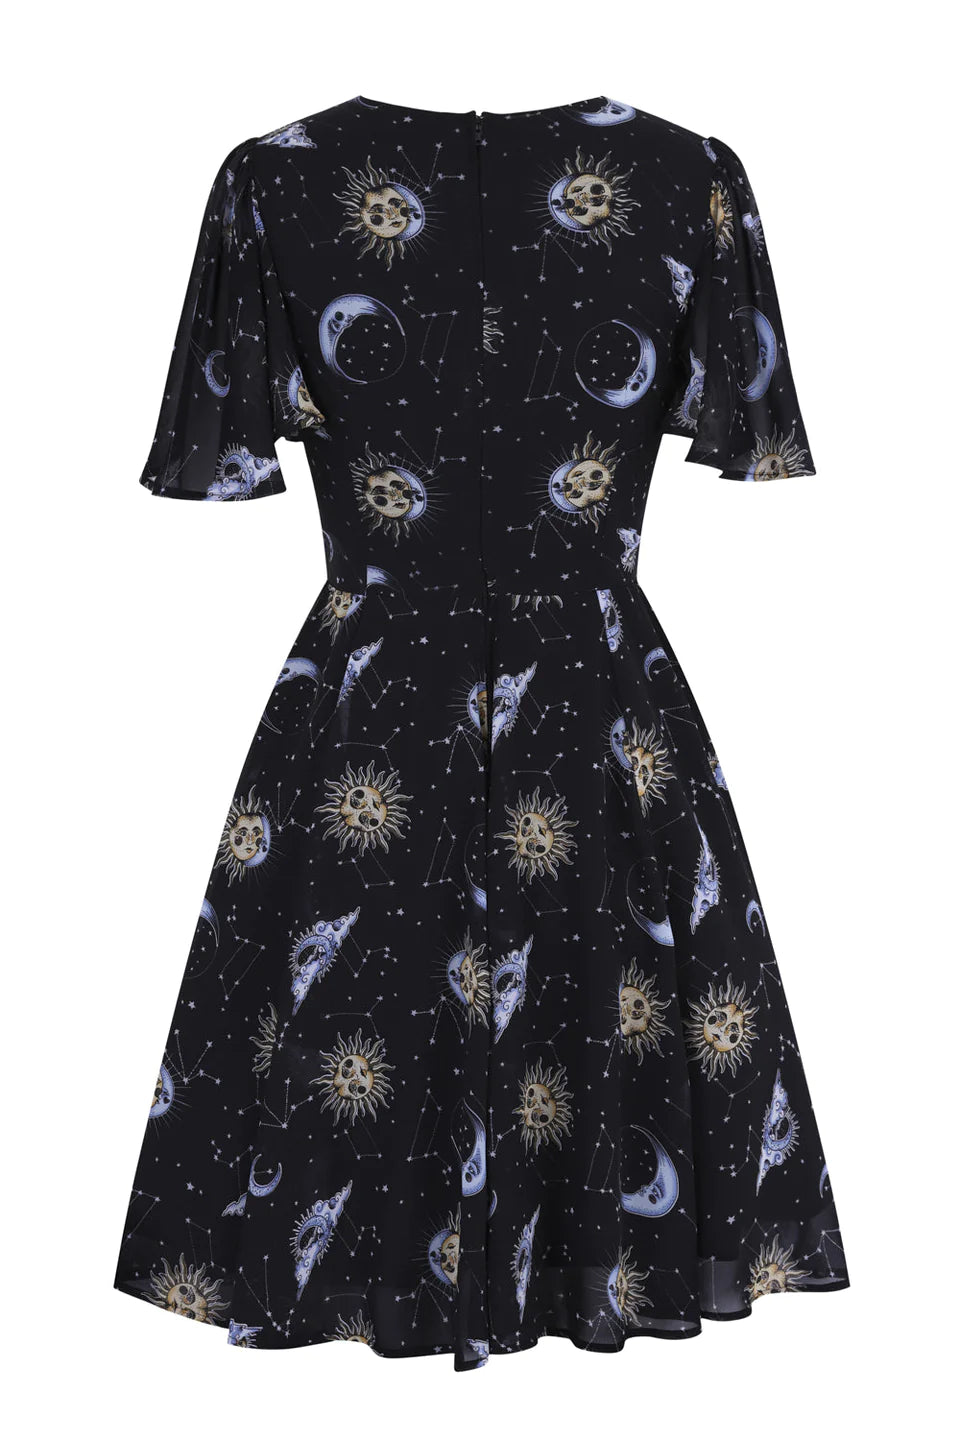 The back of the Solaris Moon and Stars dress  against a plain white background